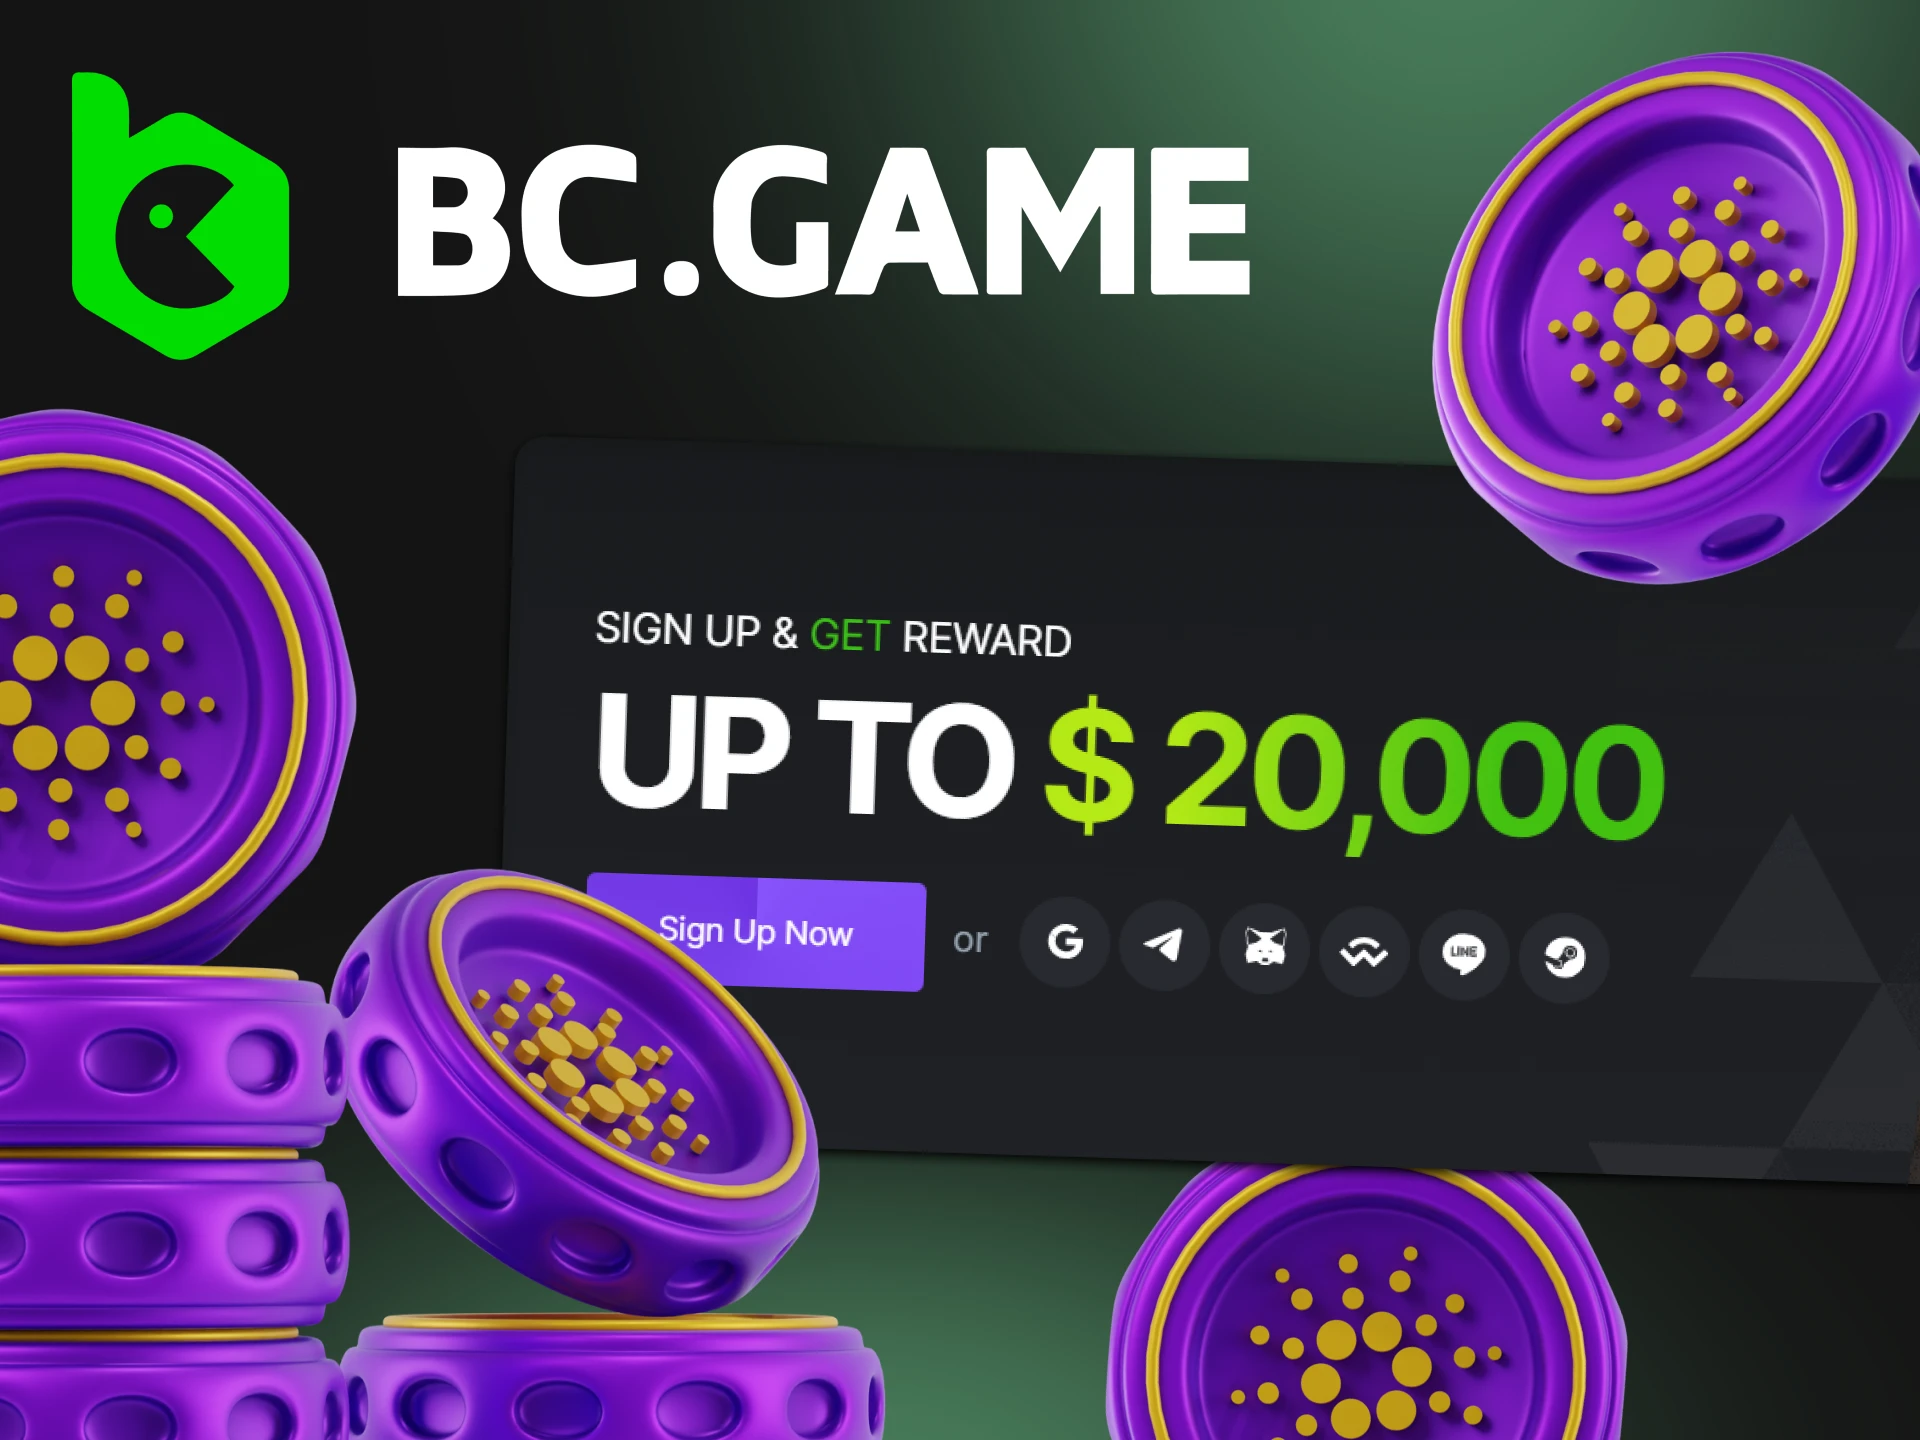 BC.Game offers the highest welcome bonus and other profitable bonuses.